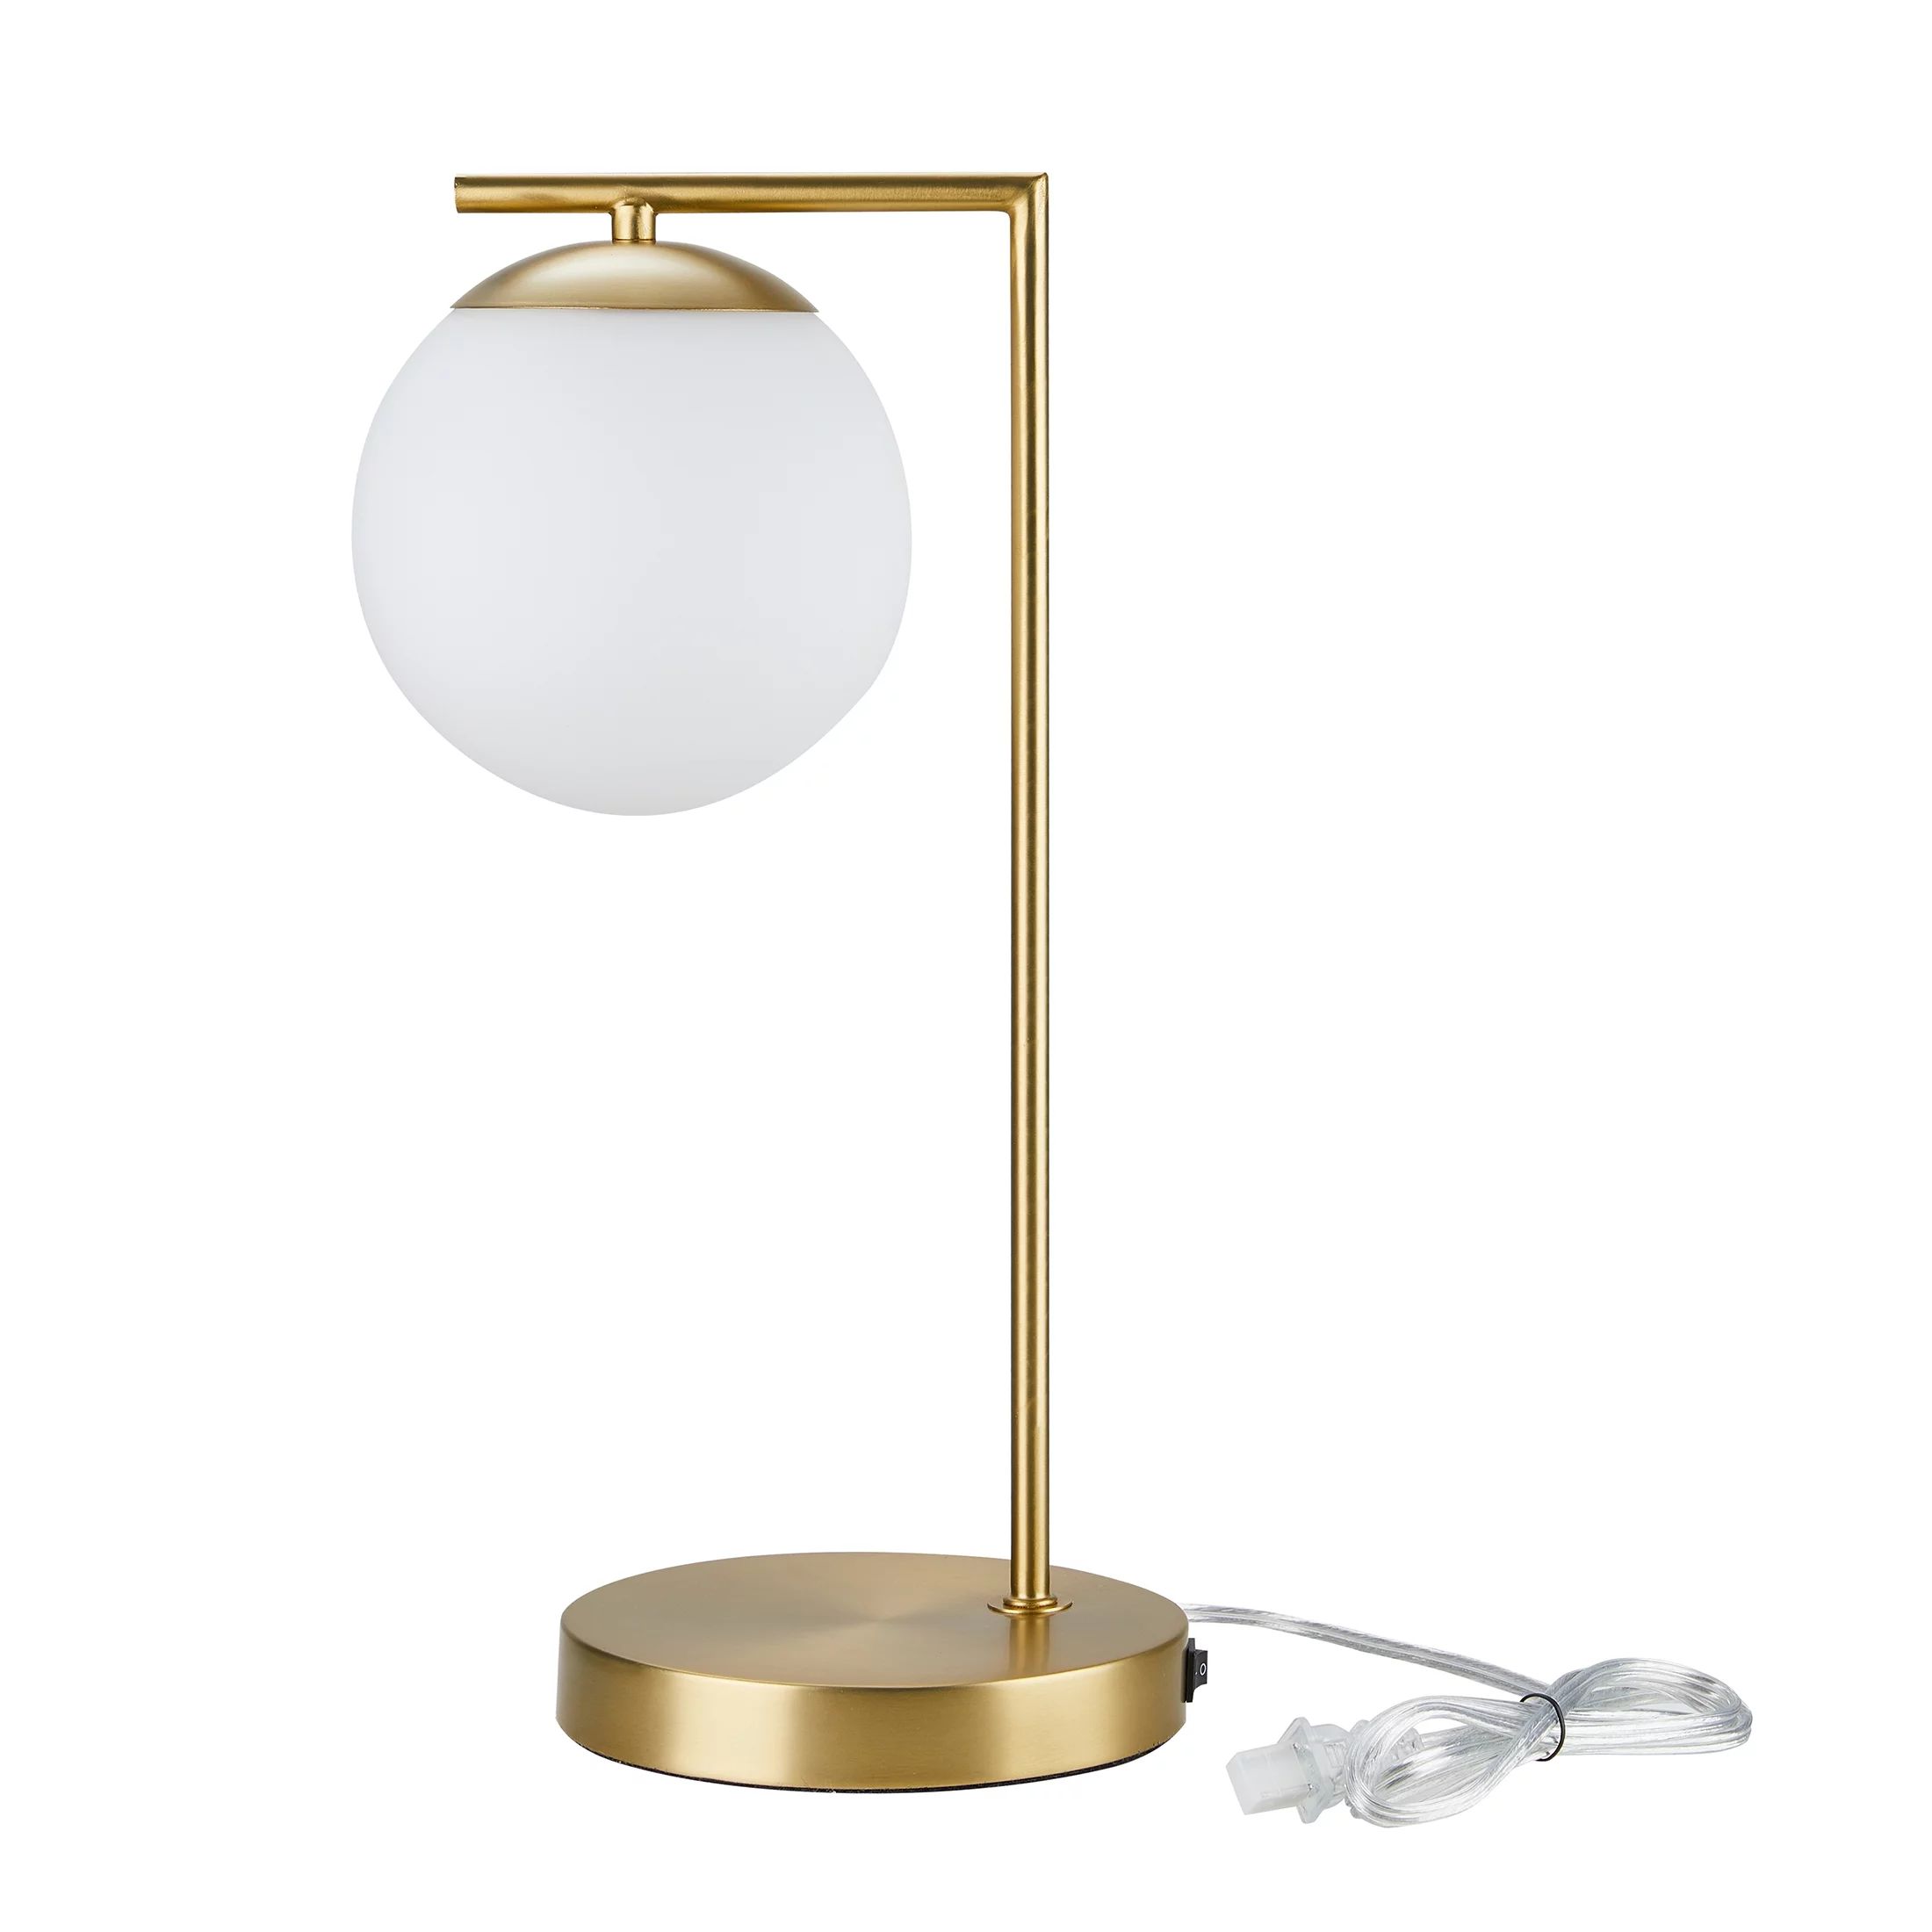 Better Homes & Gardens 17.5" Frosted Globe Desk Lamp with USB Ports, Brass | Walmart (US)